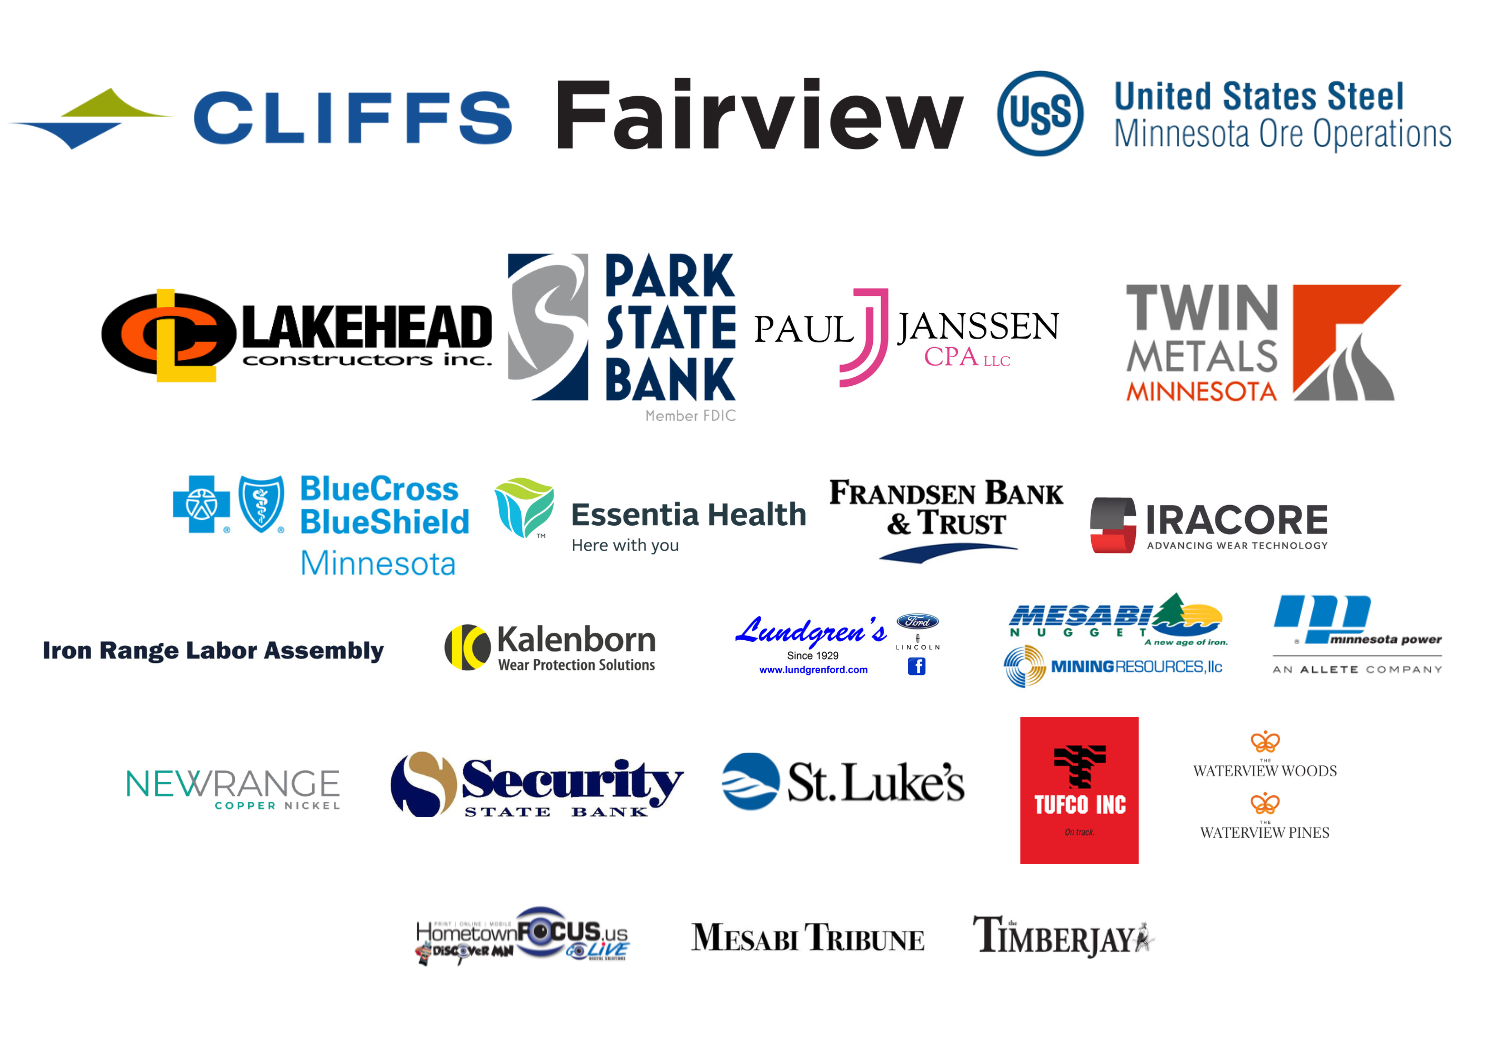 Platinum level 2024 Corporate event sponsors: Cleveland Cliffs, Fairview, U. S. Steel; Gold level 2024 CES: Lakehead Constructors, Park State Bank, Paul Janssen CPA, Twin Metals MN; Silver level 2024 CES: Blue Cross Blue Shield of Minnesota, Essentia Health, Frandsen Bank and Trust, Iracore, Iron Range Labor Assembly, Kalenborn, Lundgren's, Mesabi Nugget and Mining Resources, Minnesota Power, NewRange Copper Nickel, Security State Bank, St. Luke's, TUFCO,  Waterview Woods and Waterview Pines; 2024 Media Sponsors: Hometown Focus, Mesabi Tribune, and Tower Timberjay